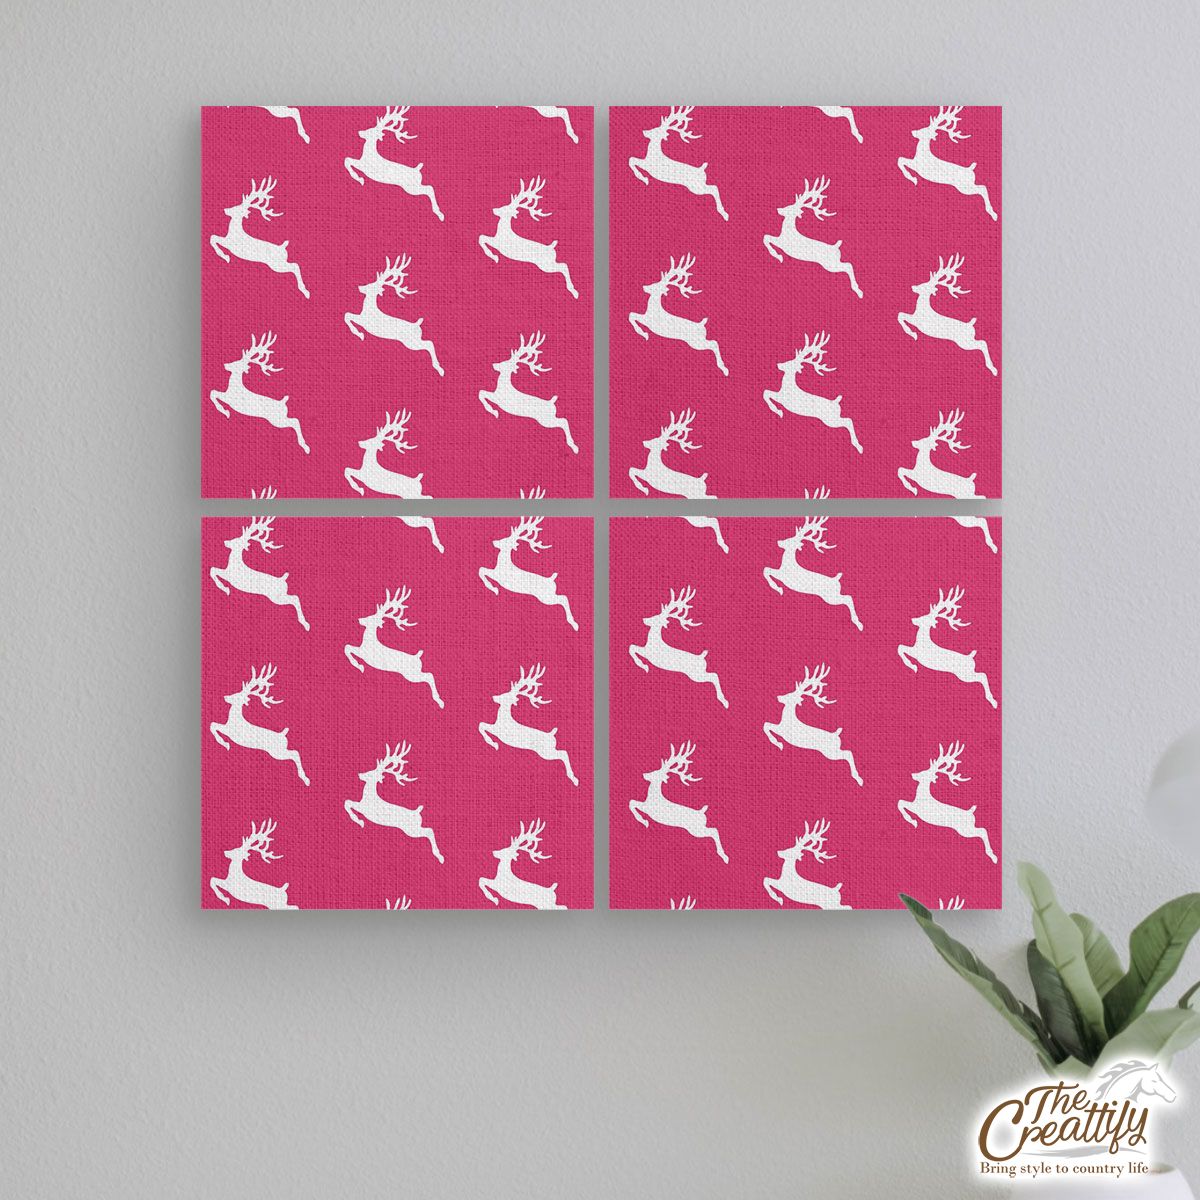 Pink And White Christmas Reindeeer Mural With Frame